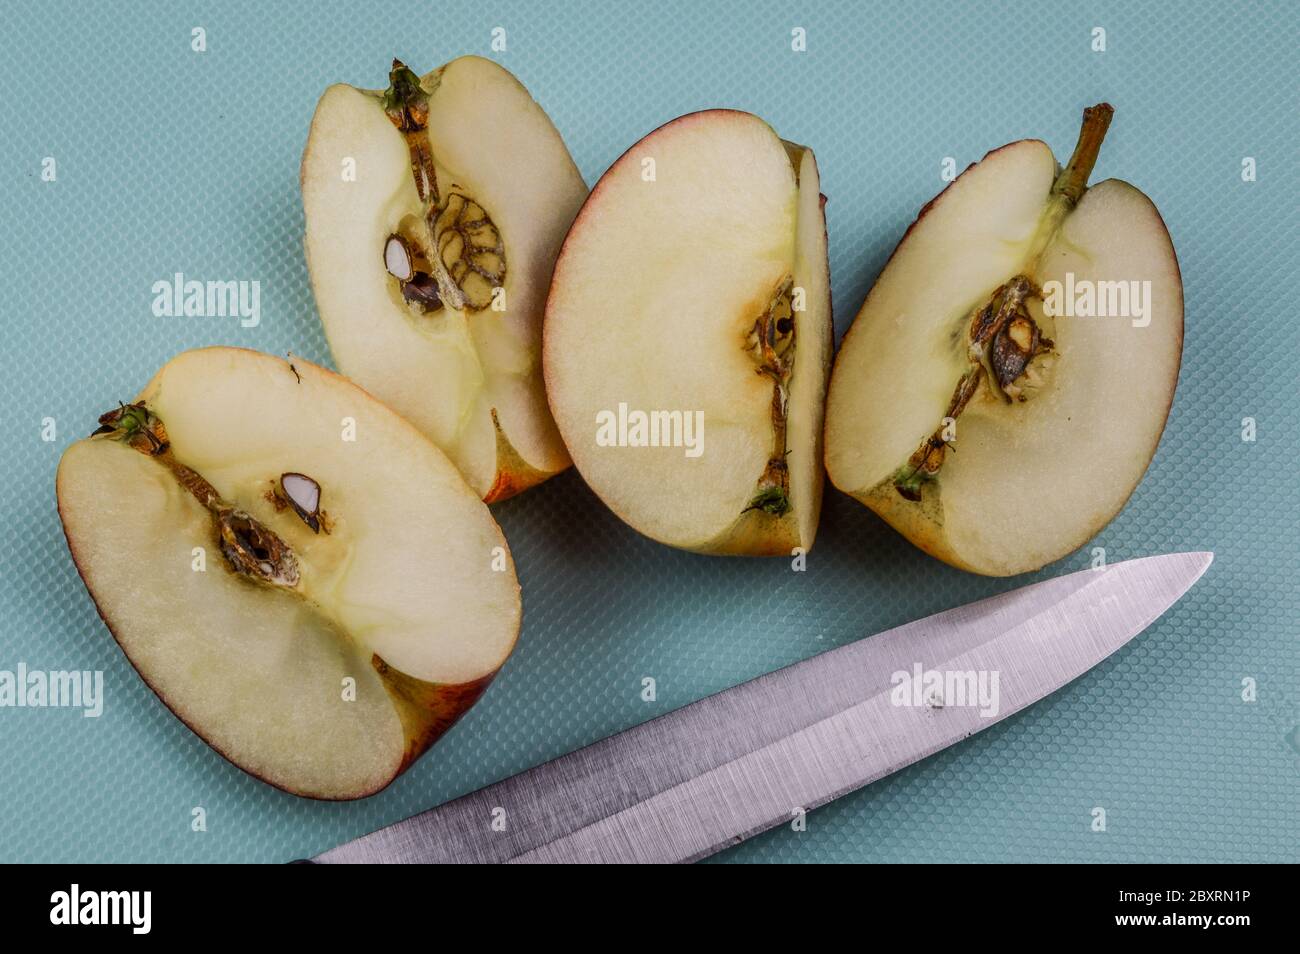 Quarters of a red organic apple sliced with kitchen knife on a light blue textured background Stock Photo